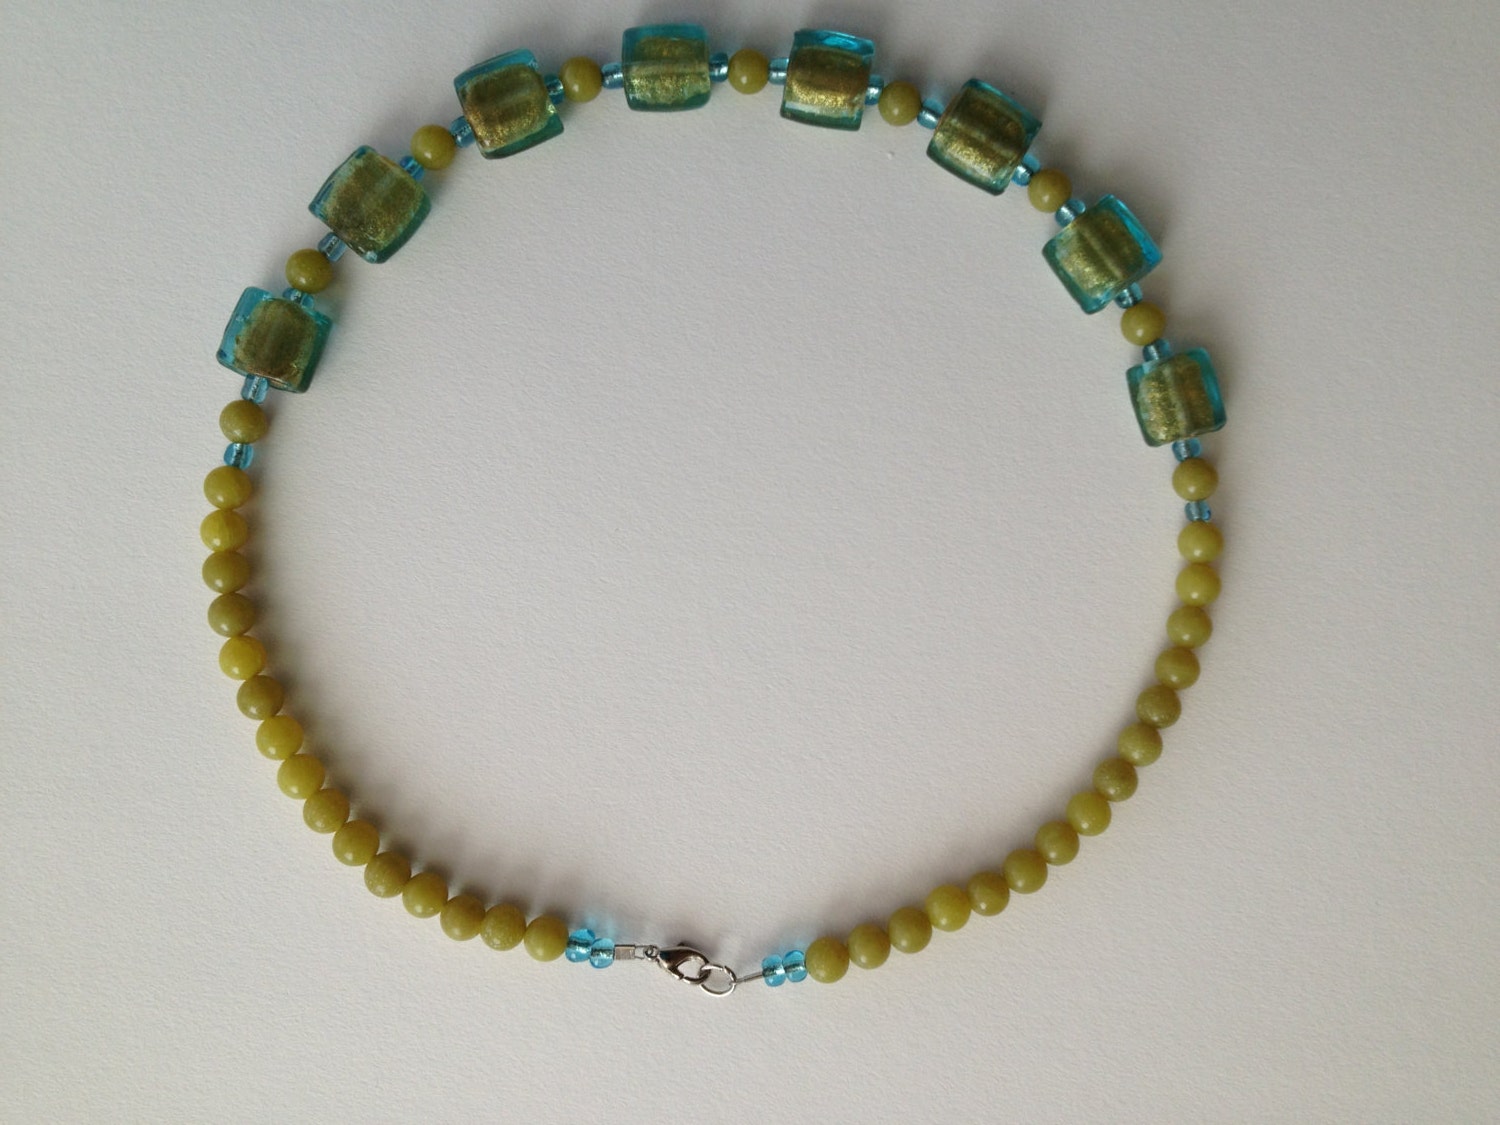 Light blue and lime green beads necklace - Handmade - Glass beads necklace